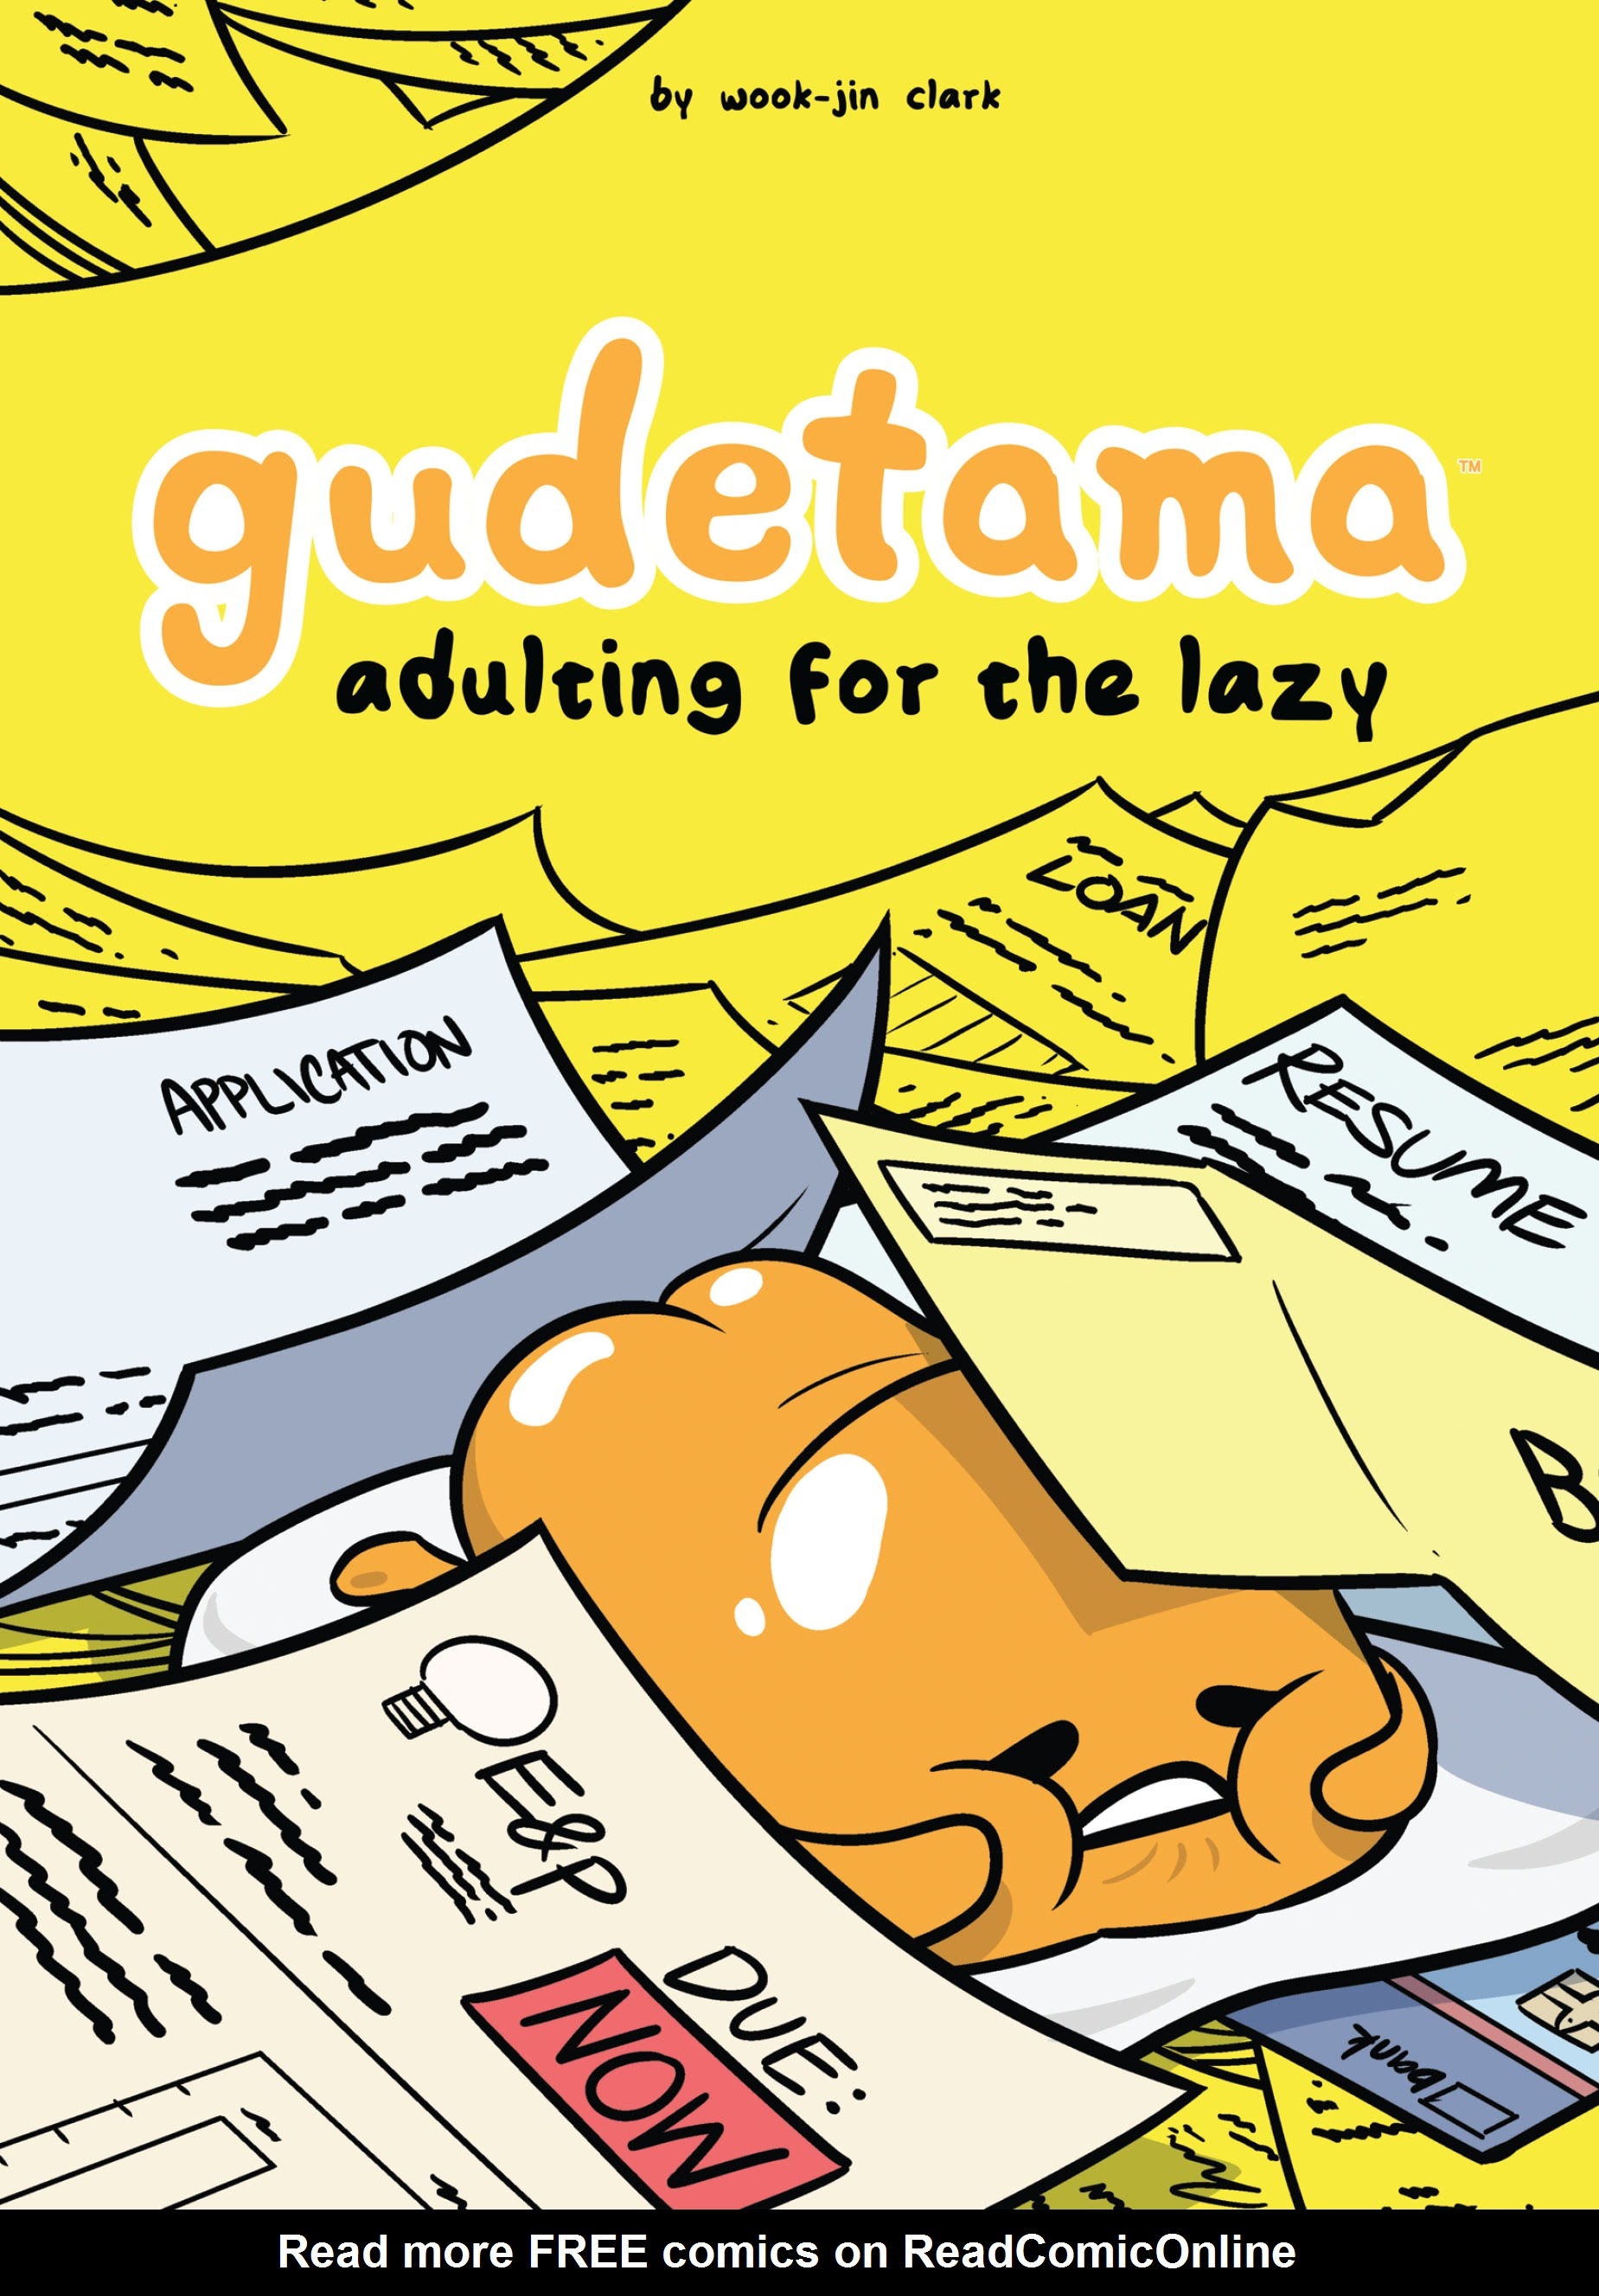 Read online Gudetama comic -  Issue # Adulting for the Lazy - 1